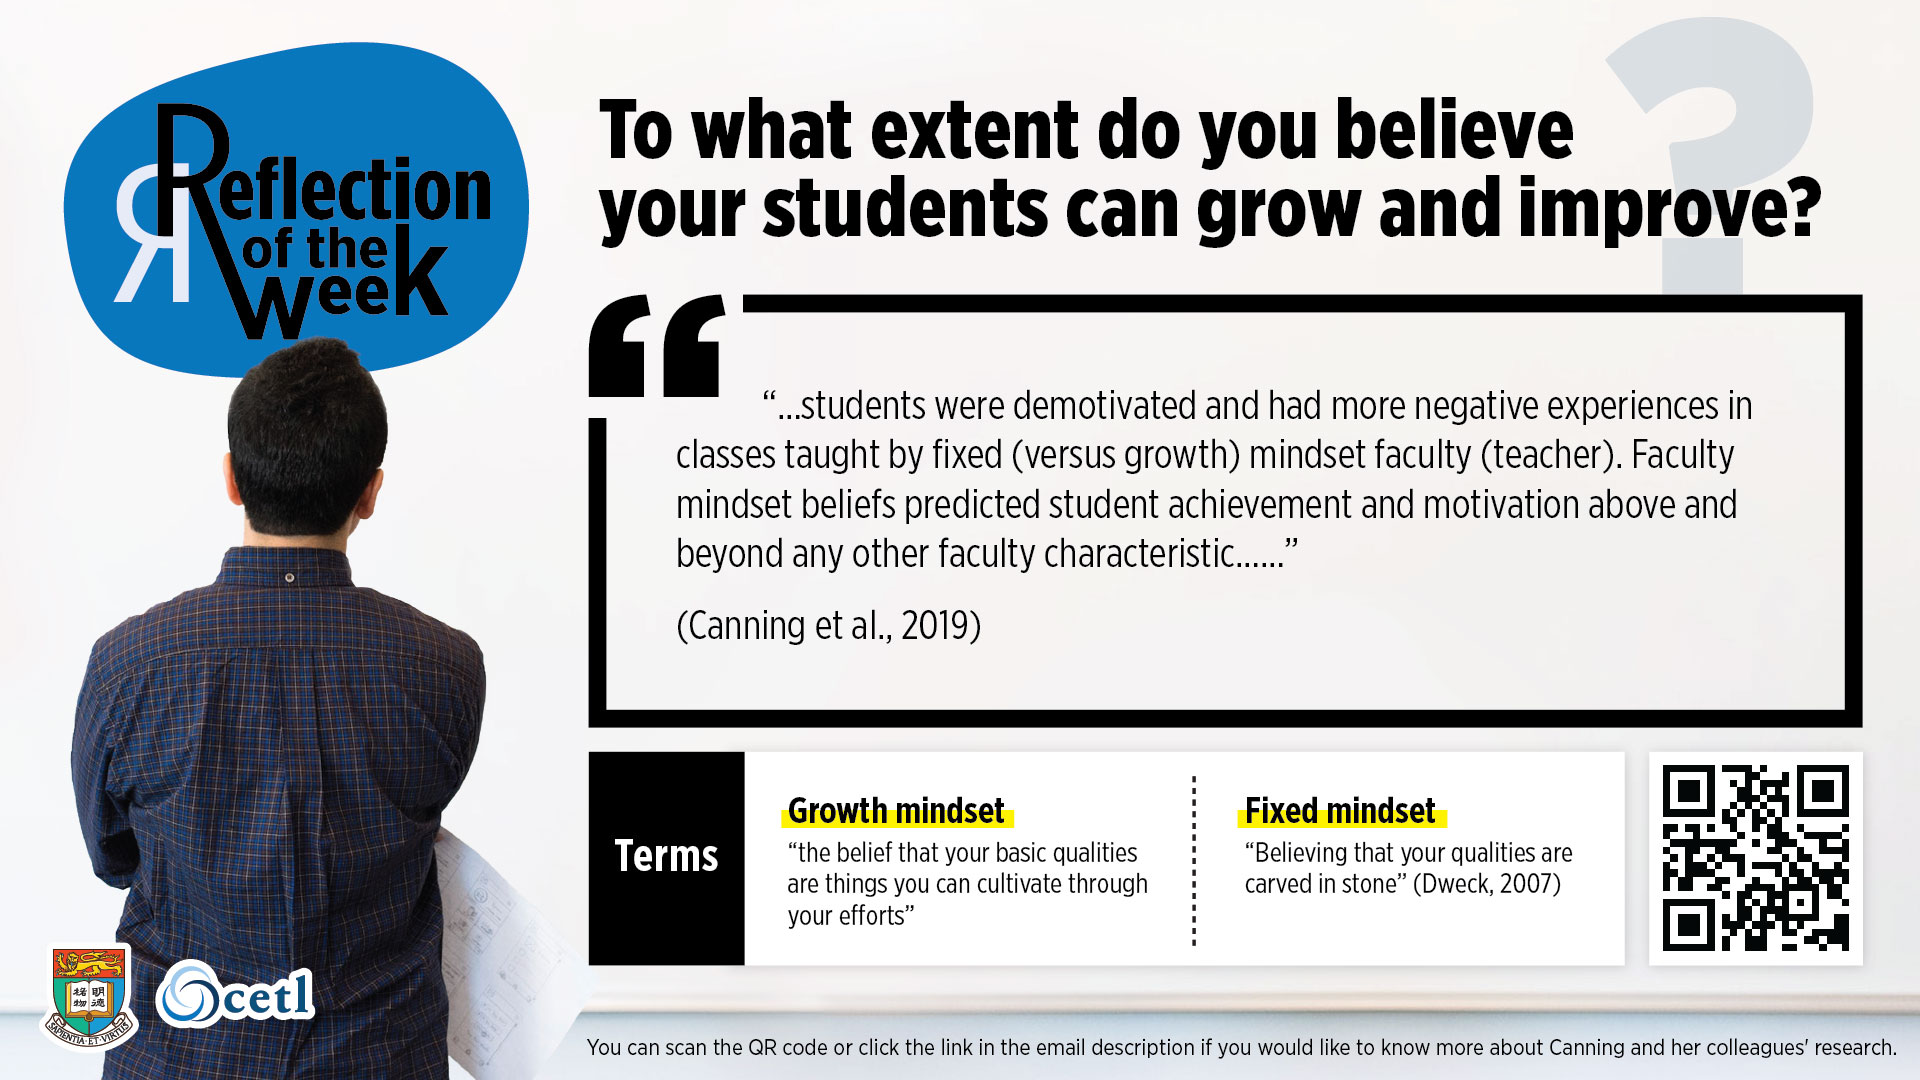 Canning et al. - “…students were demotivated and had more negative experiences in classes taught by fixed (versus growth) mindset faculty (teacher). Faculty mindset beliefs predicted student achievement and motivation above and beyond any other faculty characteristic……”